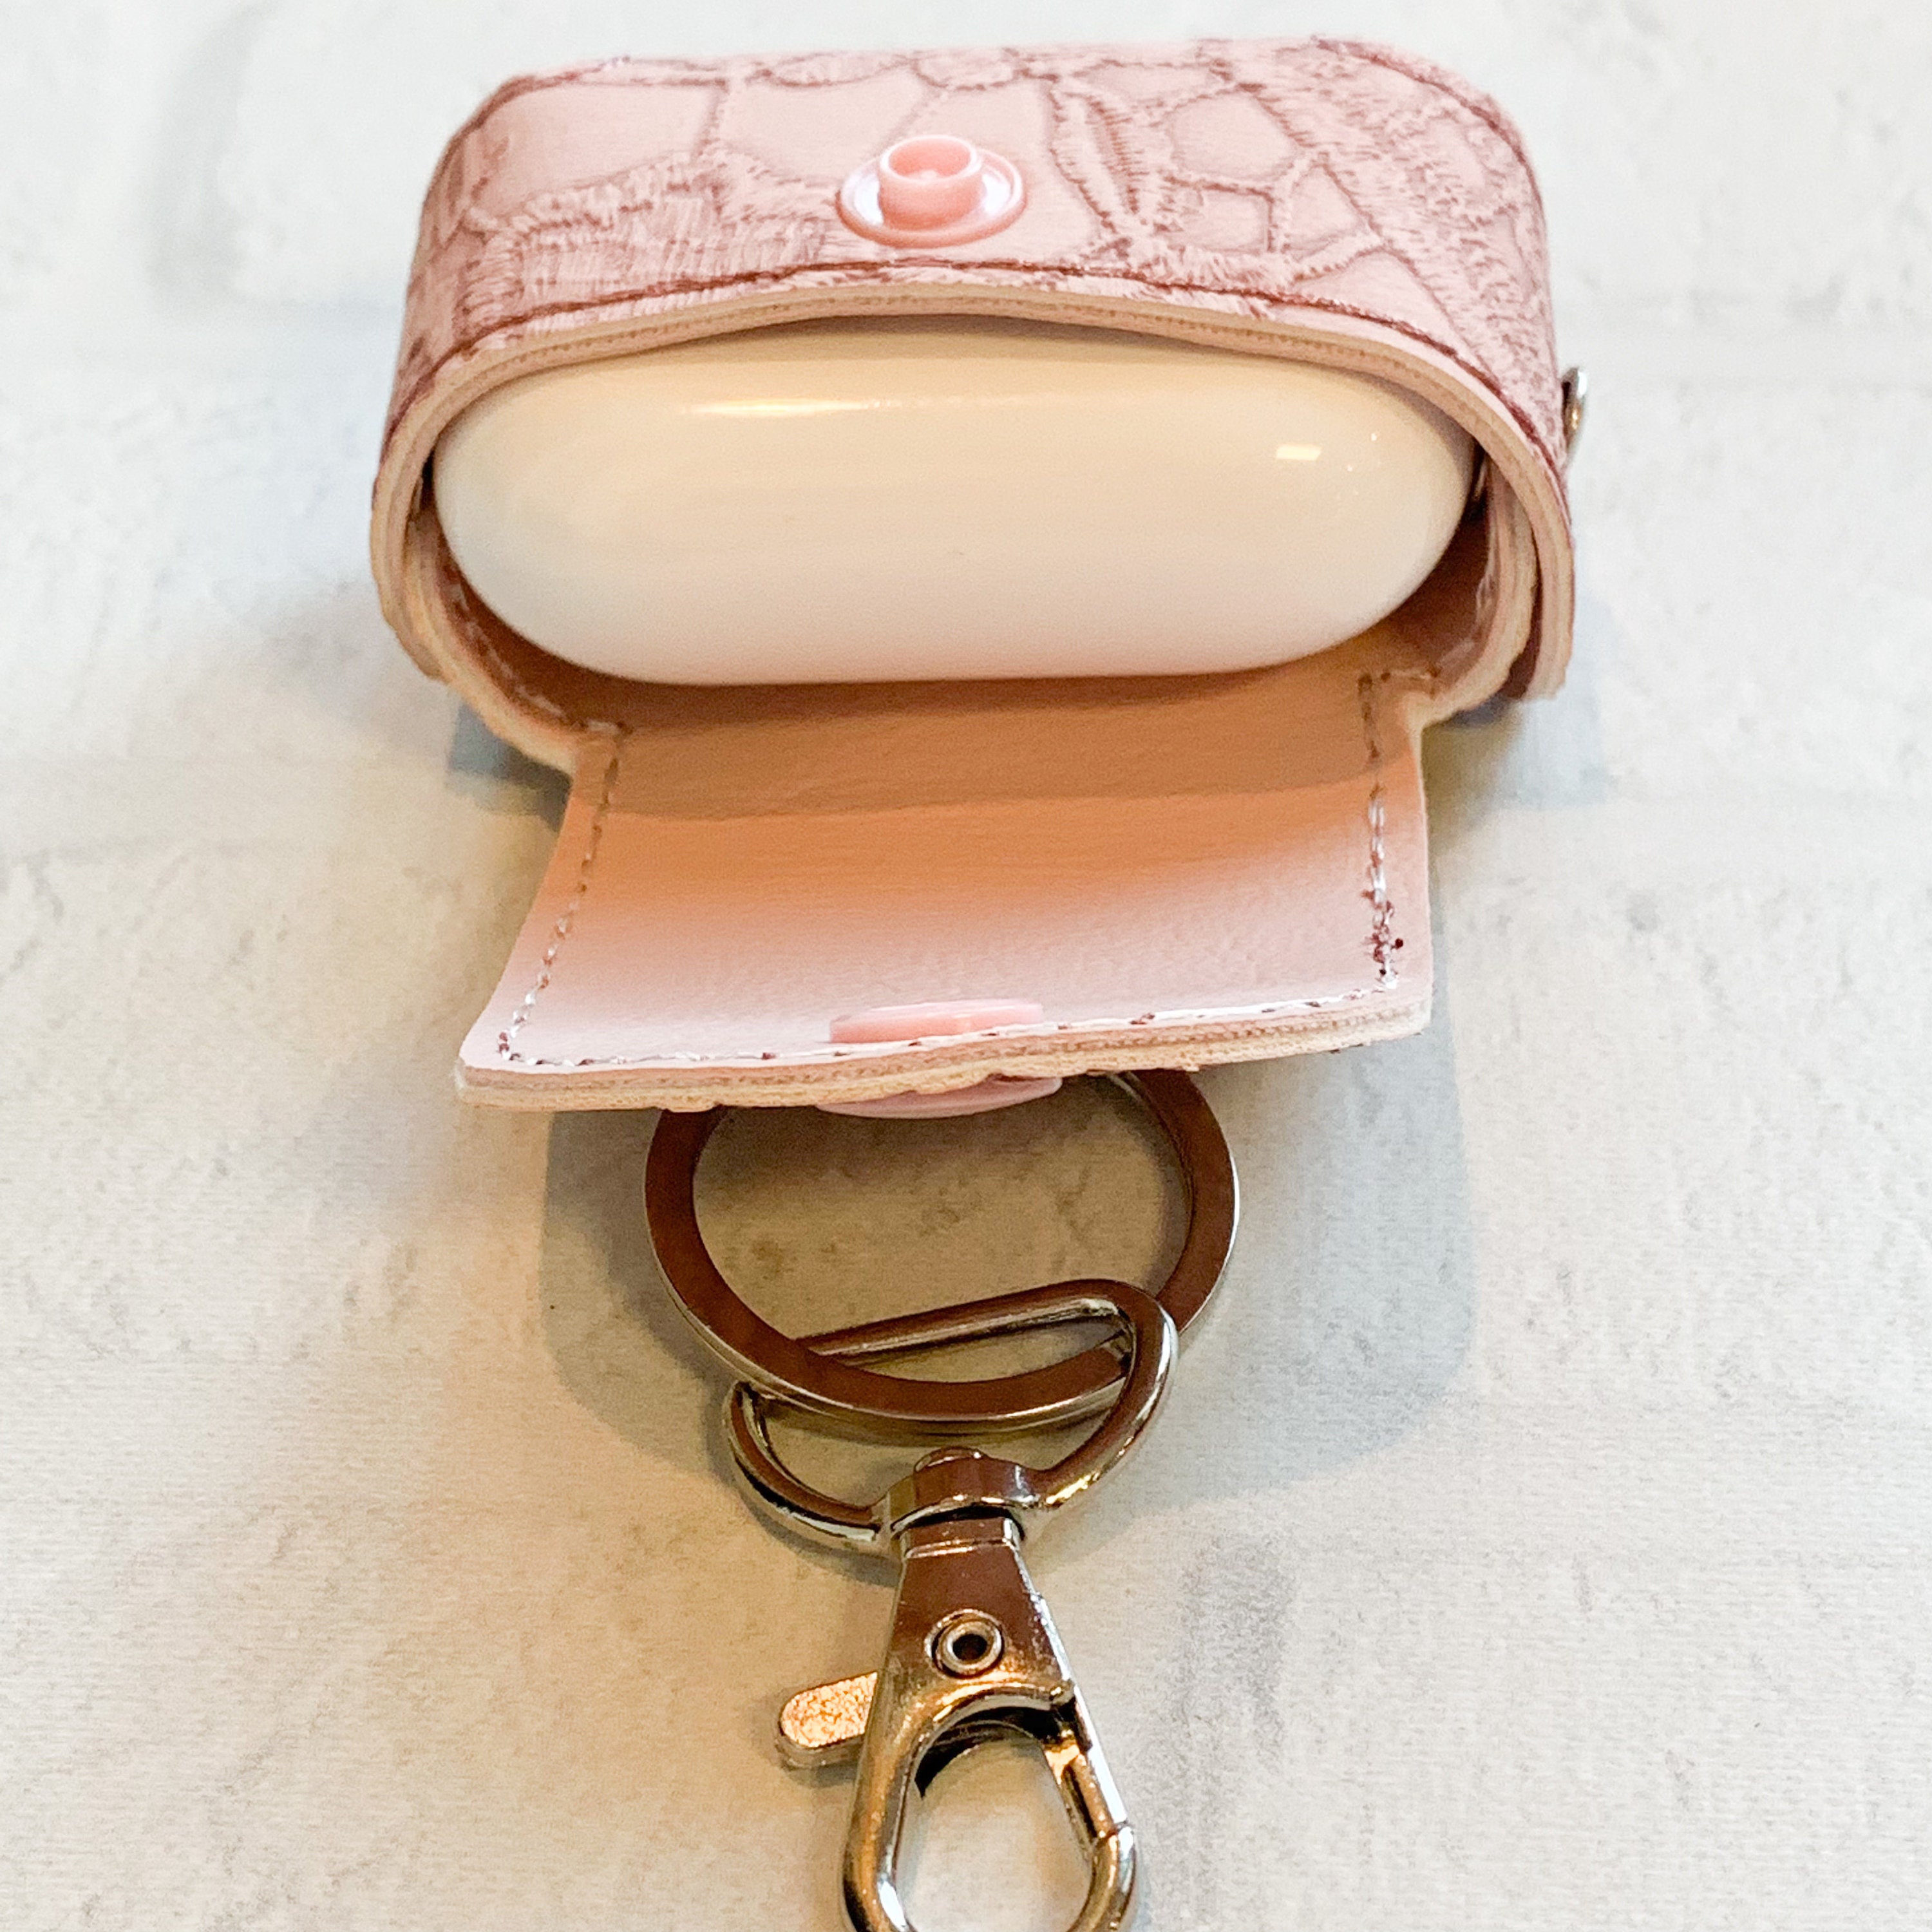 Airpods Pro Case Vegan Leather Wristlet Keychain, Flap Pouch